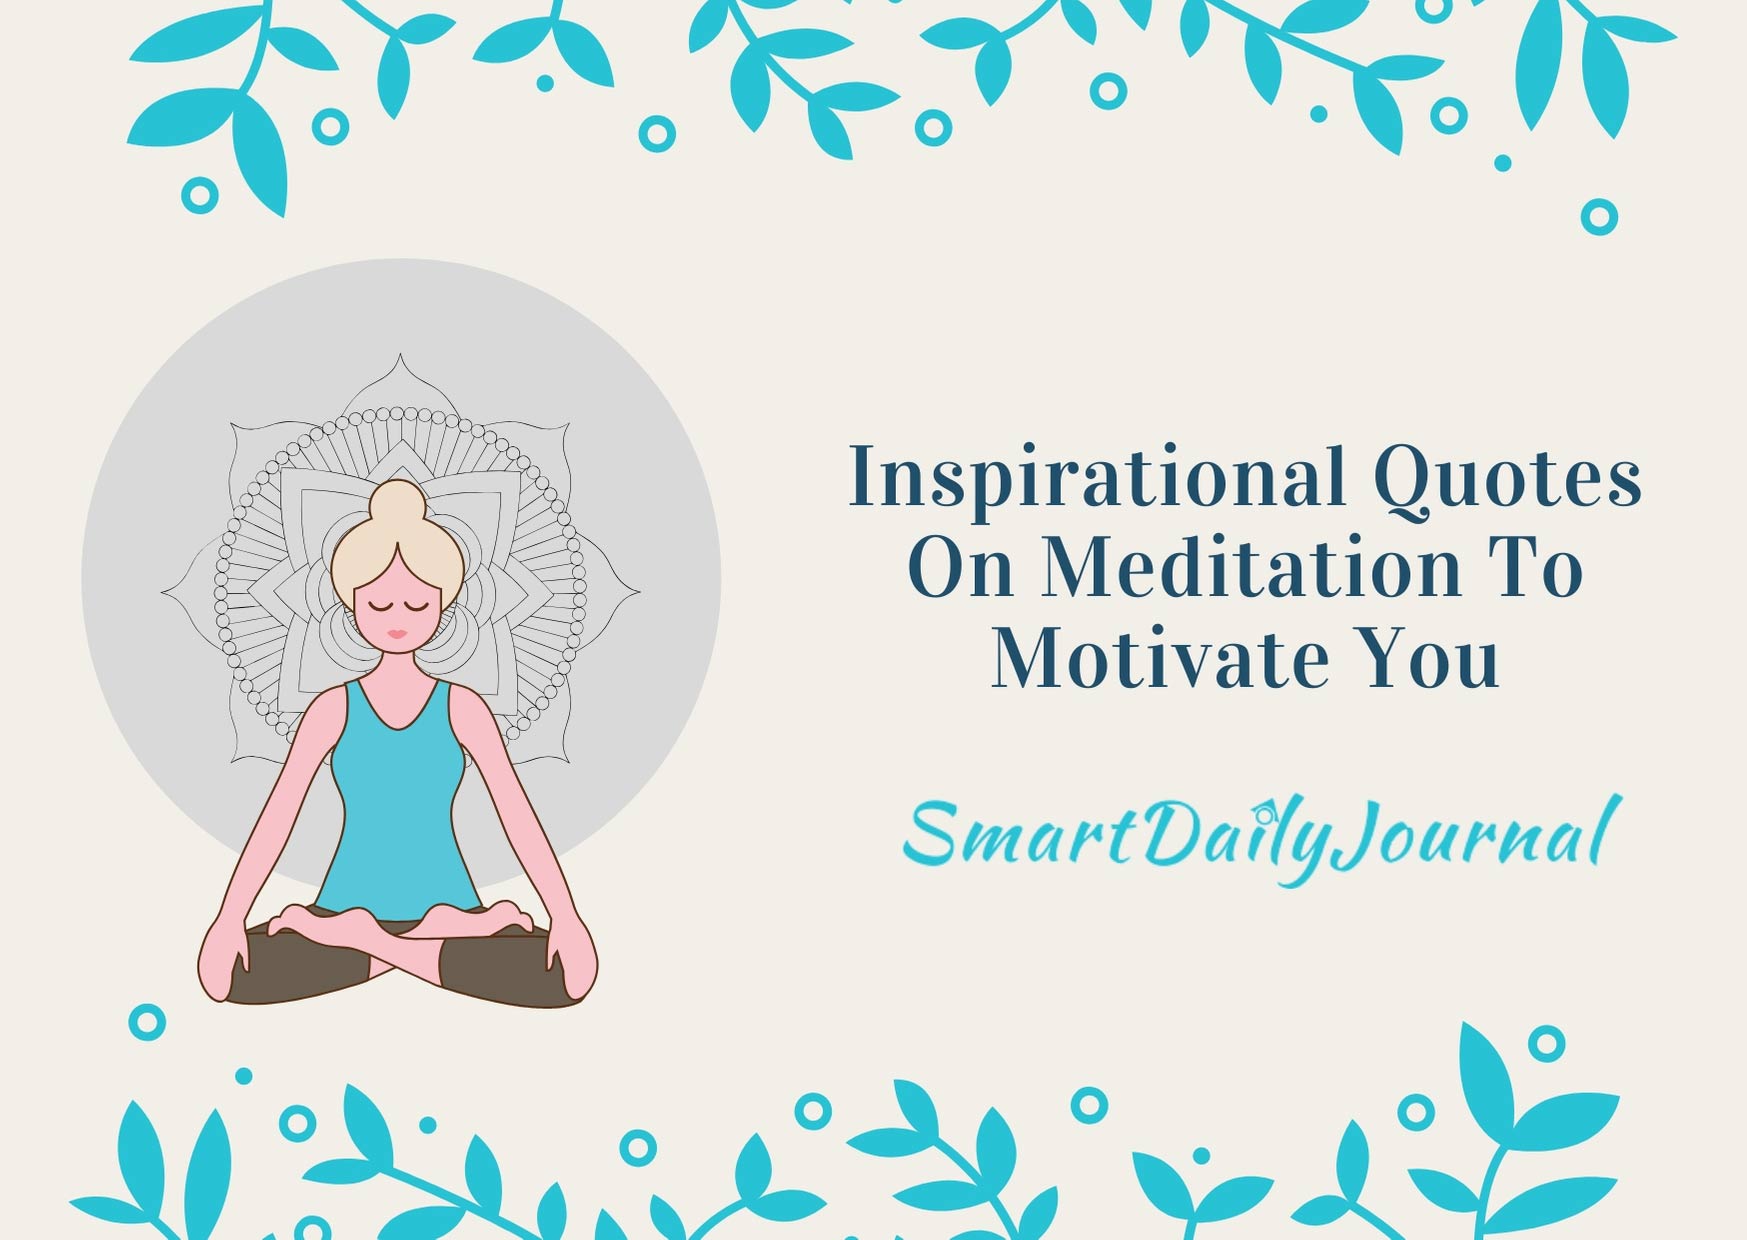 37 Inspirational Quotes On Meditation To Motivate You